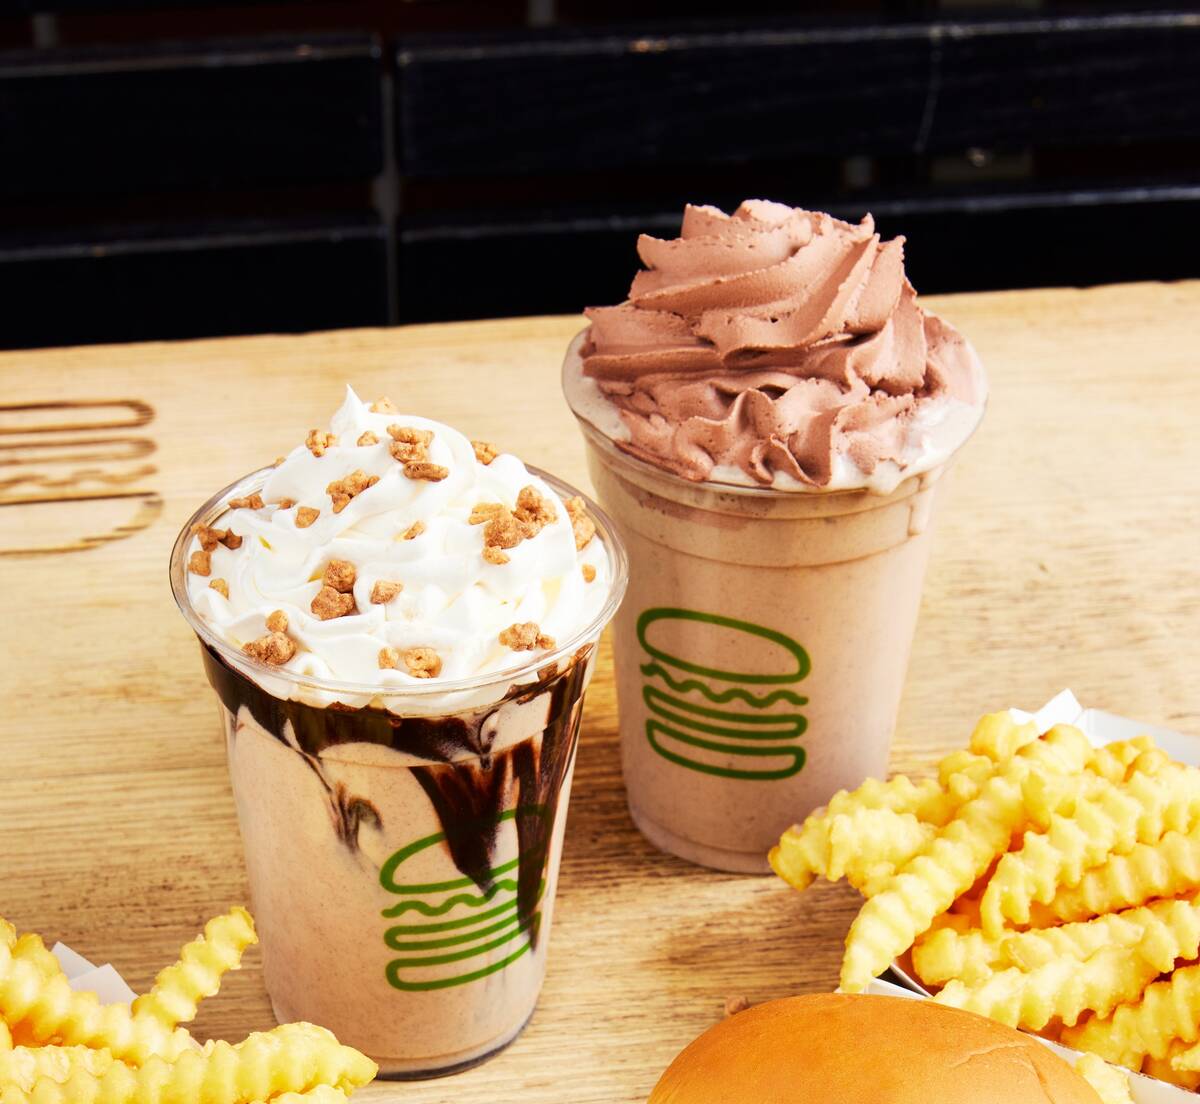 On May 3, 2022, folks can use the Shake Shack app to order the new chocolate churro and Oreo fu ...